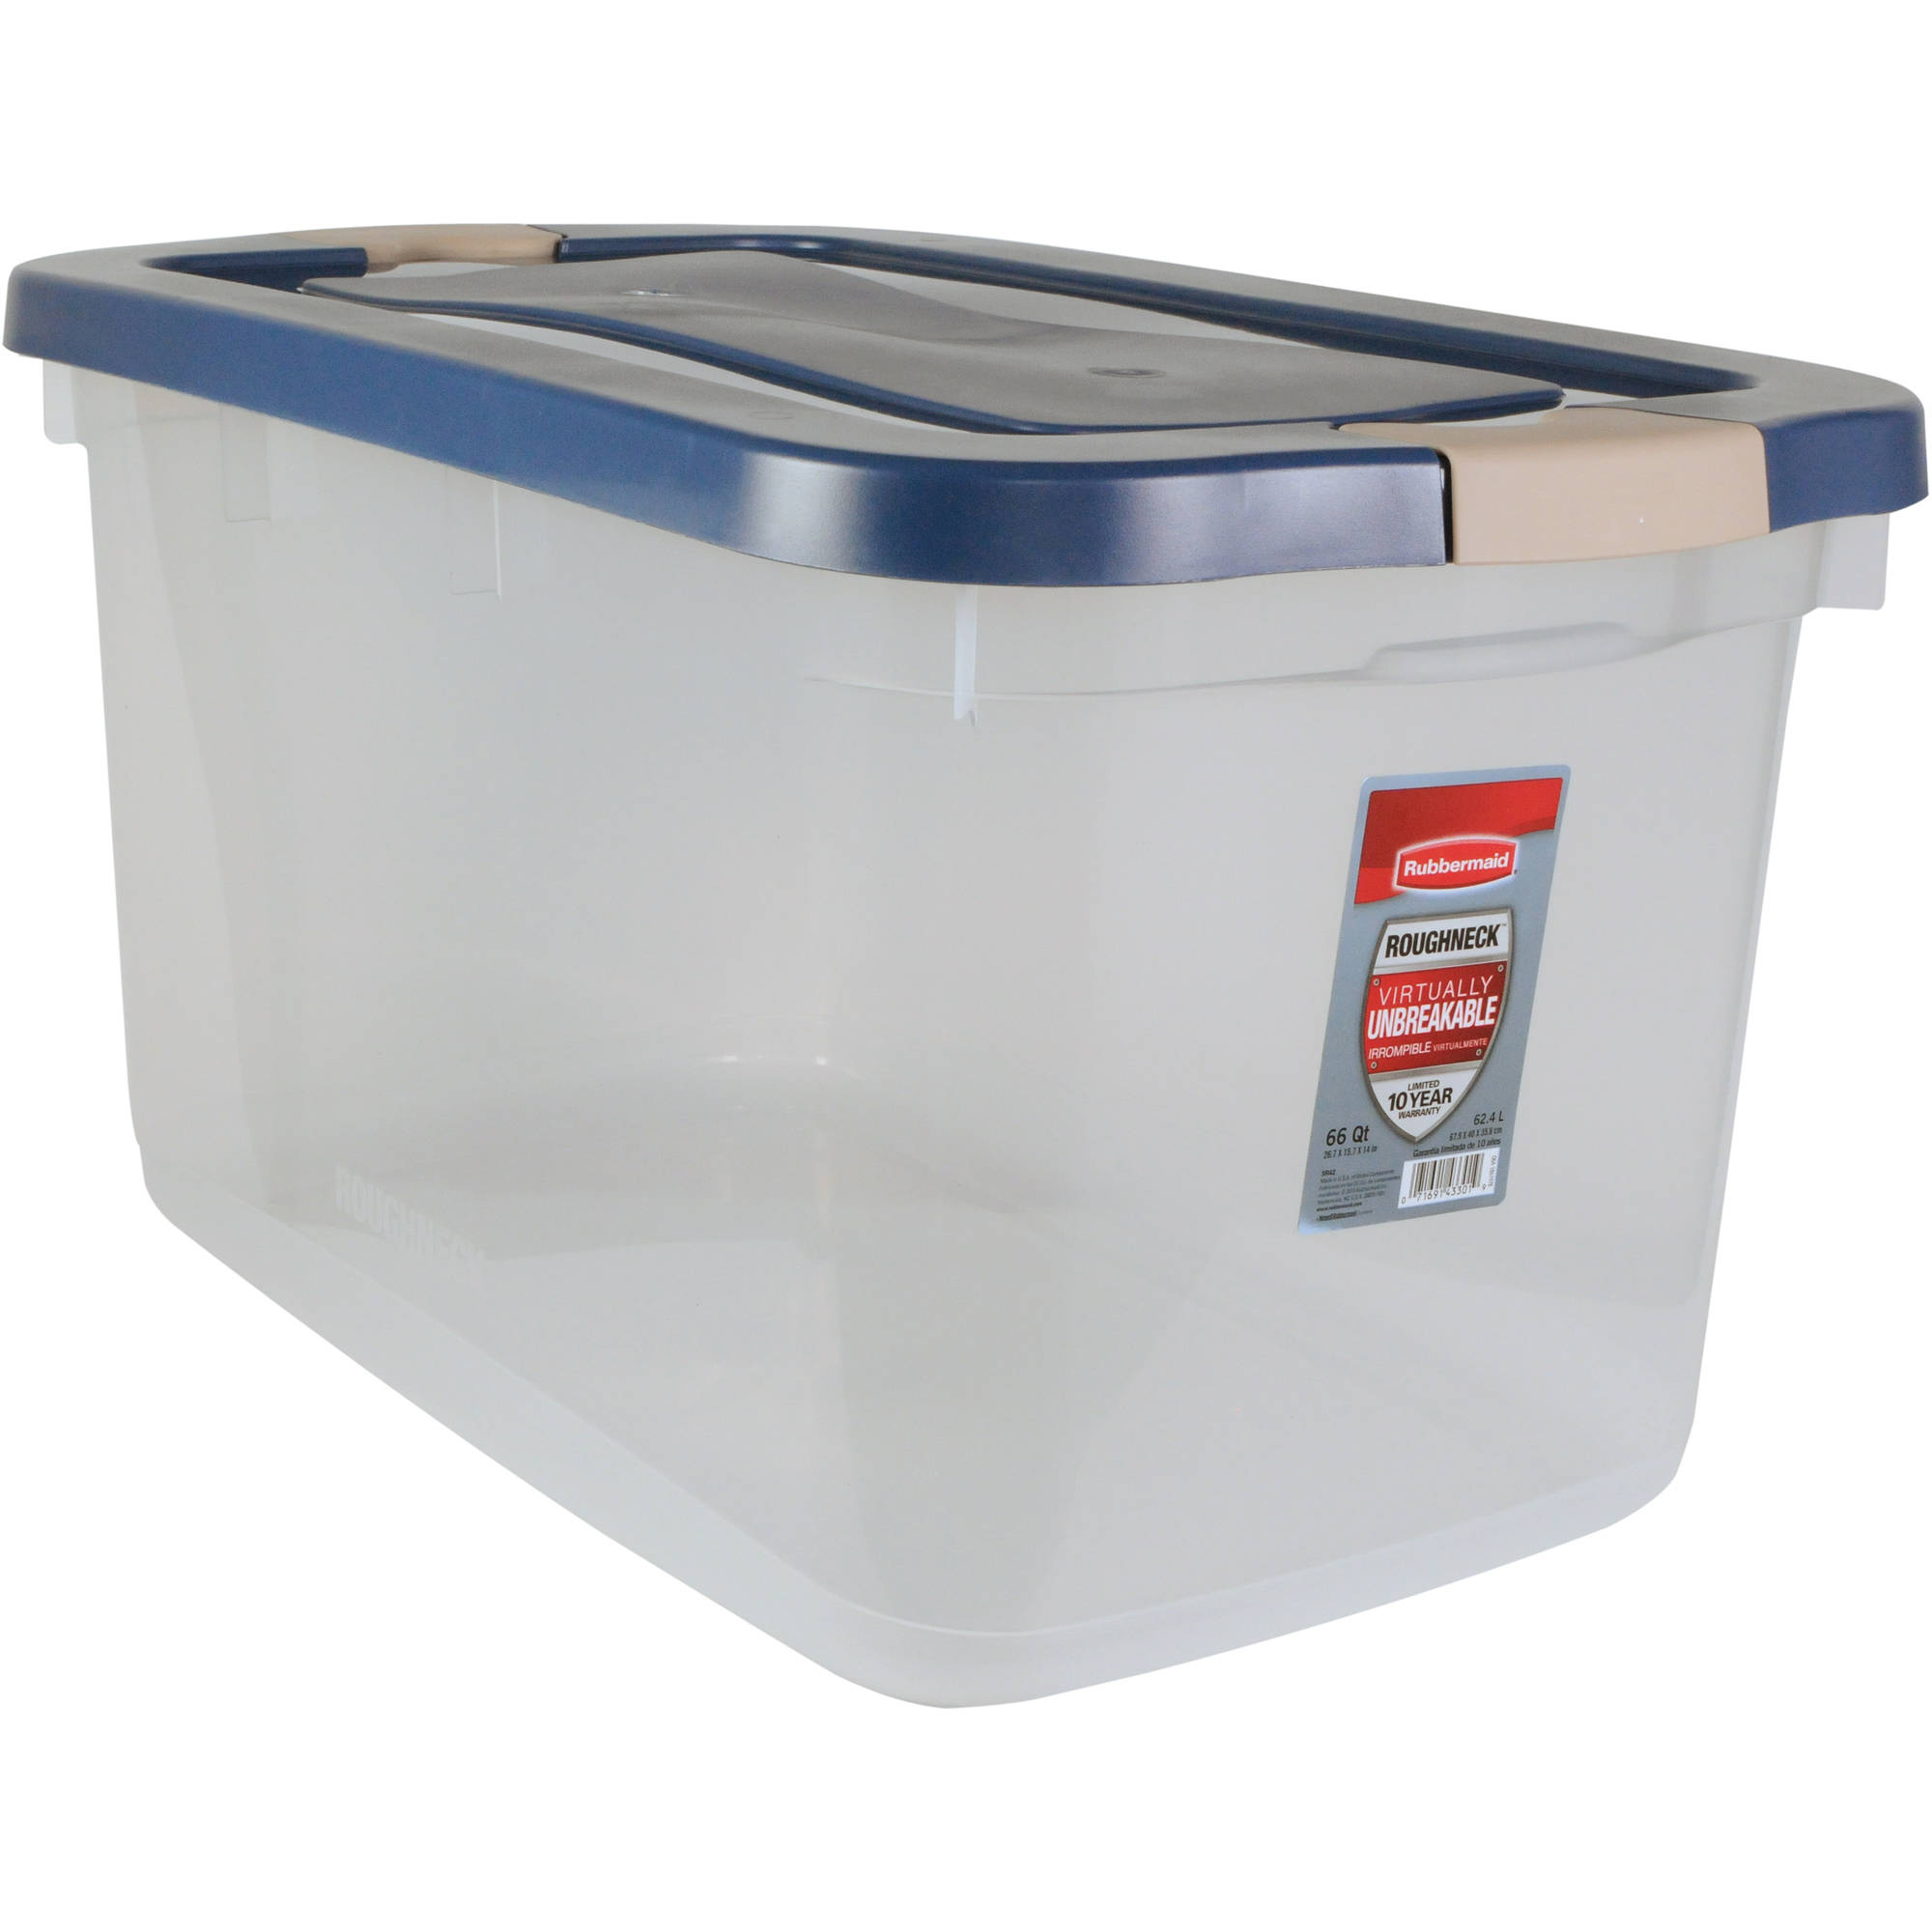 Rubbermaid Roughneck 66 Qt. (16.5 Gal) Clear Storage Tote Bin, Clear with Blue Lid - image 1 of 3